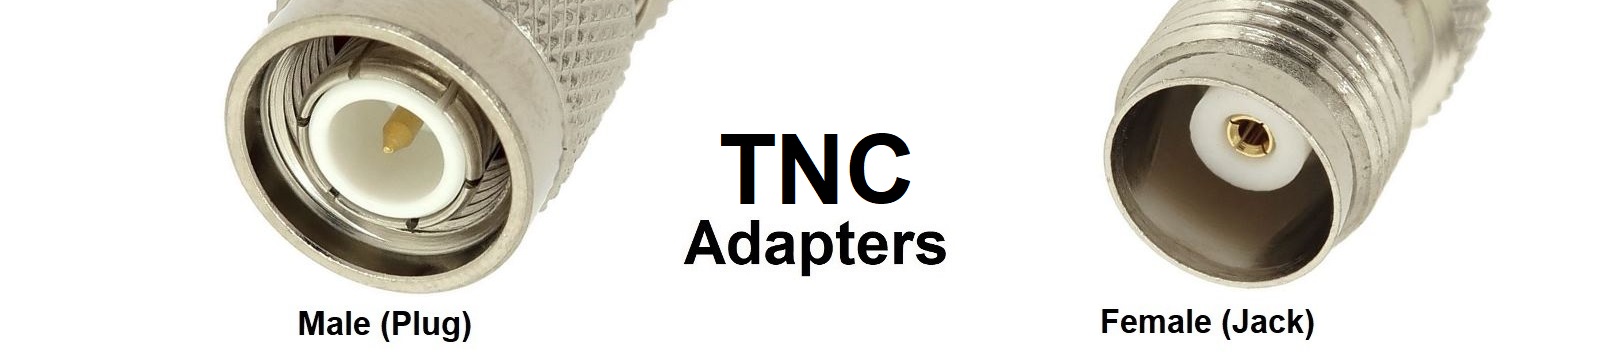 TNC Adapters Category Banner - Max-Gain Systems, Inc.